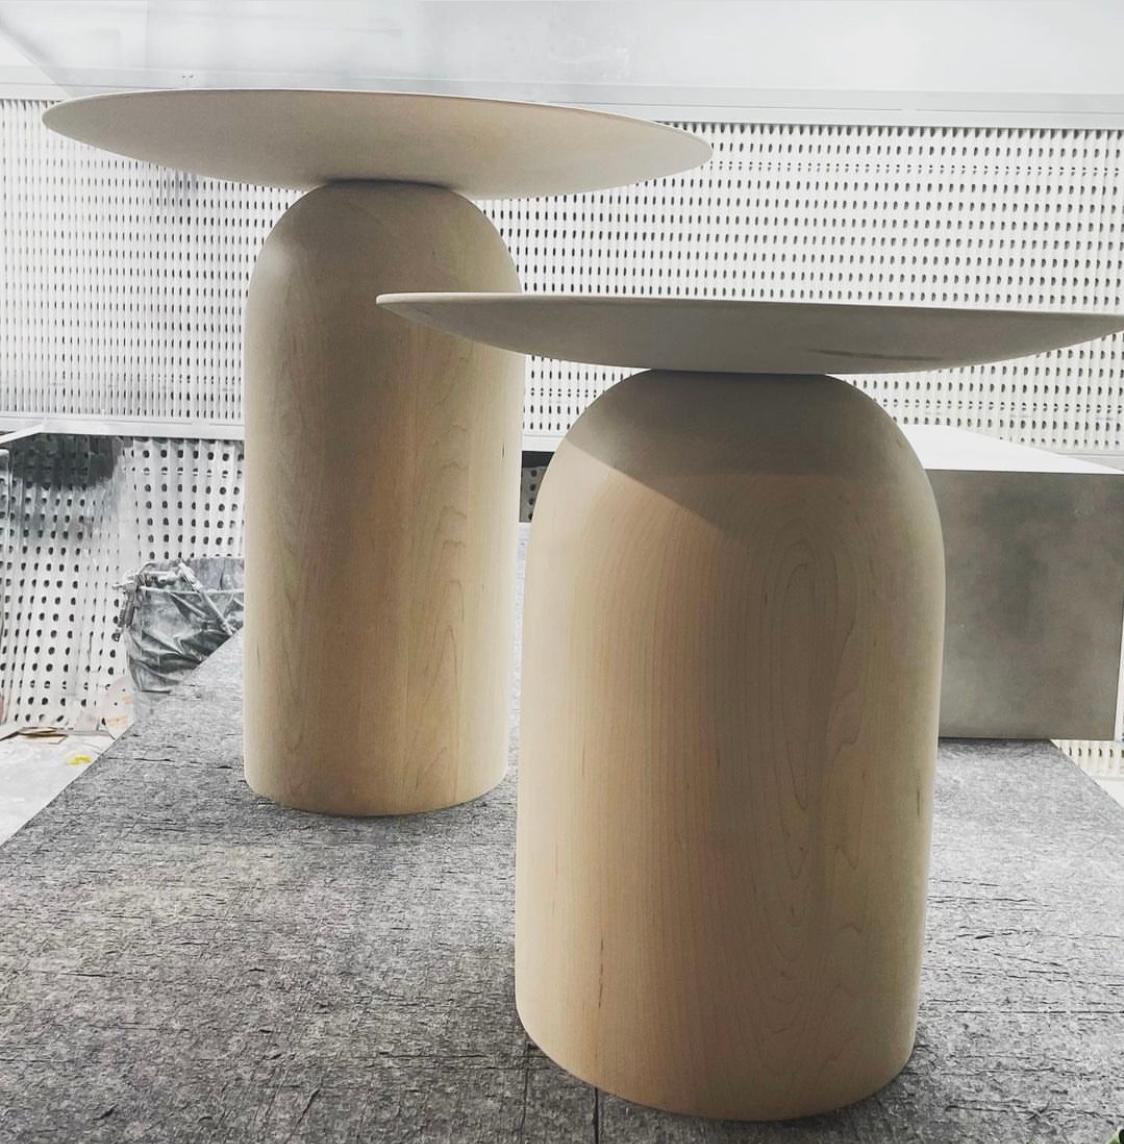 This EGG center hall table was first made to be a central piece in a recent,  Architectural Digest feature, pictured here.  All of our truly artisanal, minimal EGGTables are made by hand on a single lathe by a master craftsmen in Australia. 